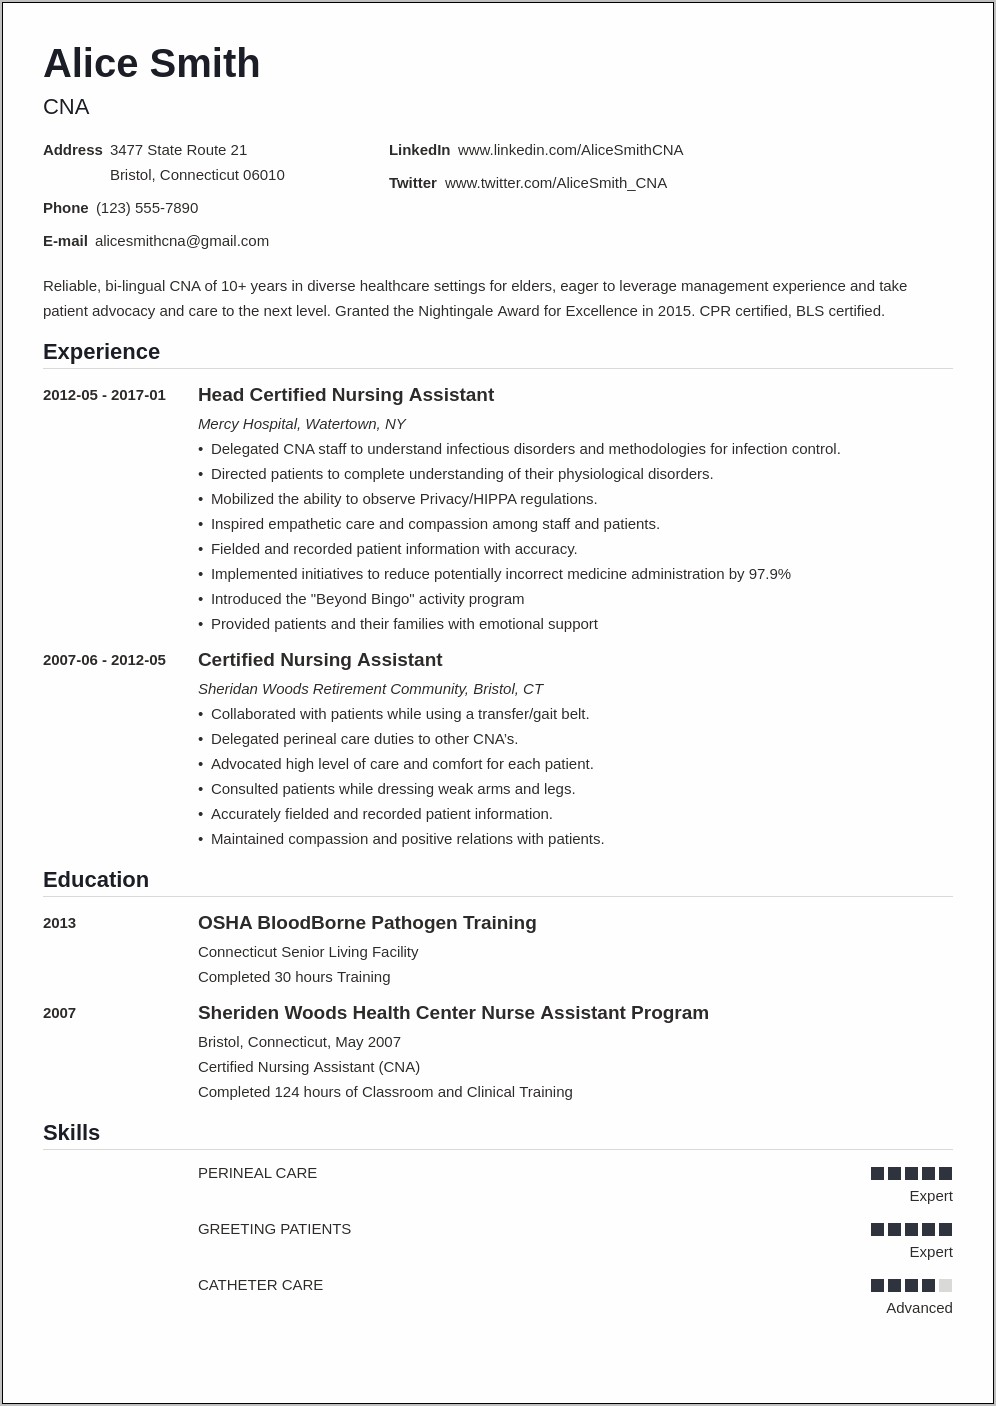 Resume Description For Nurse Working With Rt